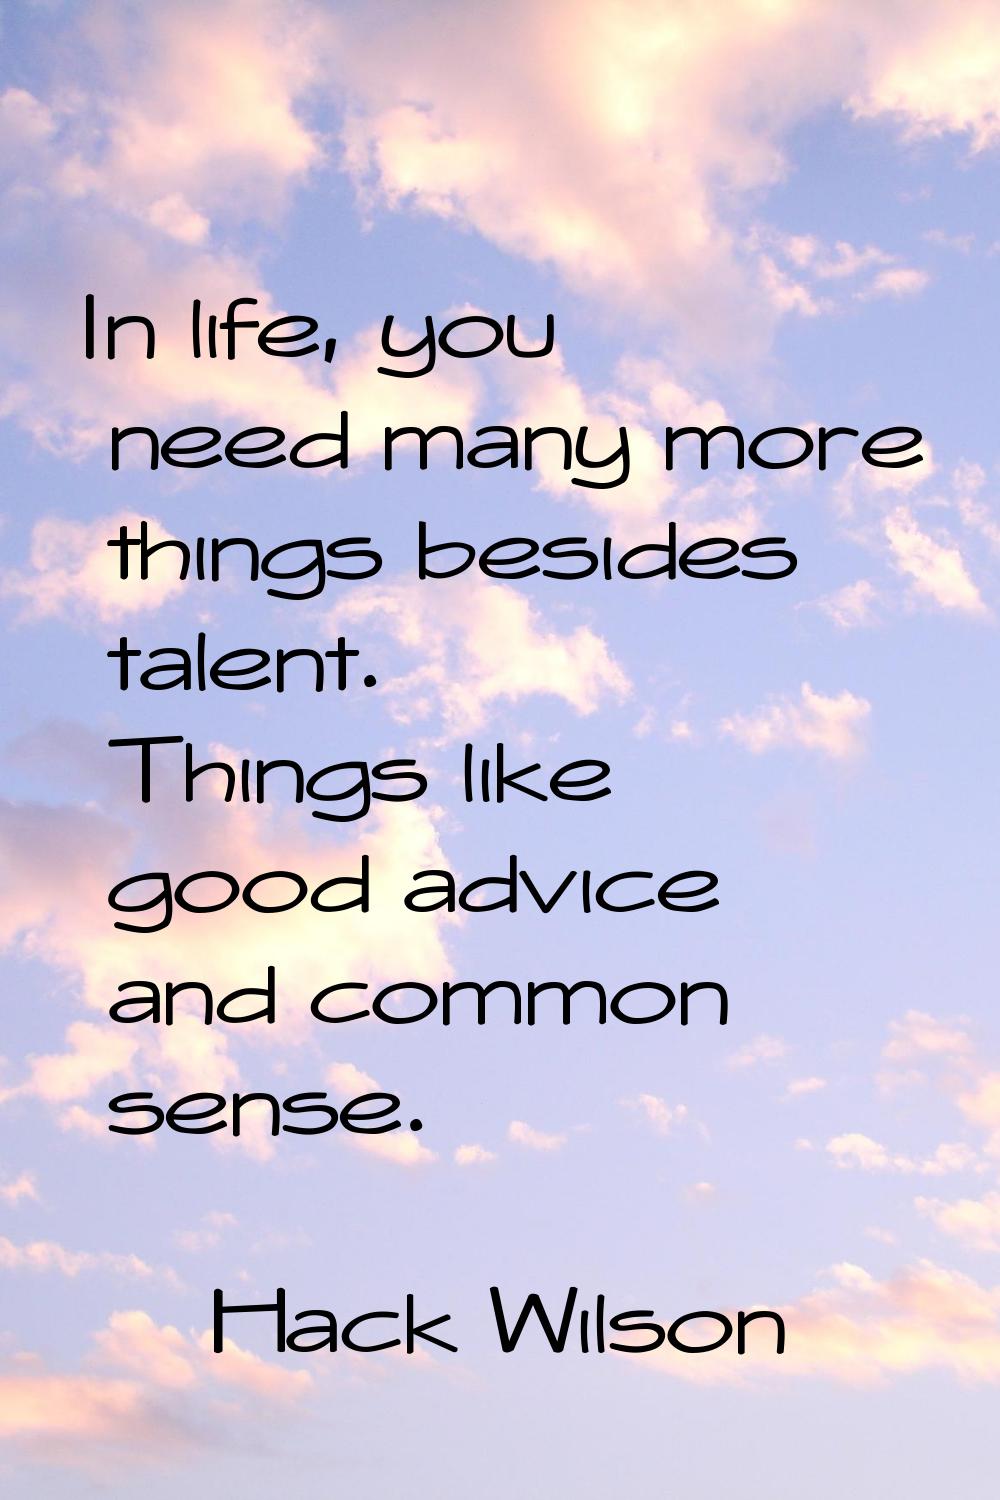 In life, you need many more things besides talent. Things like good advice and common sense.